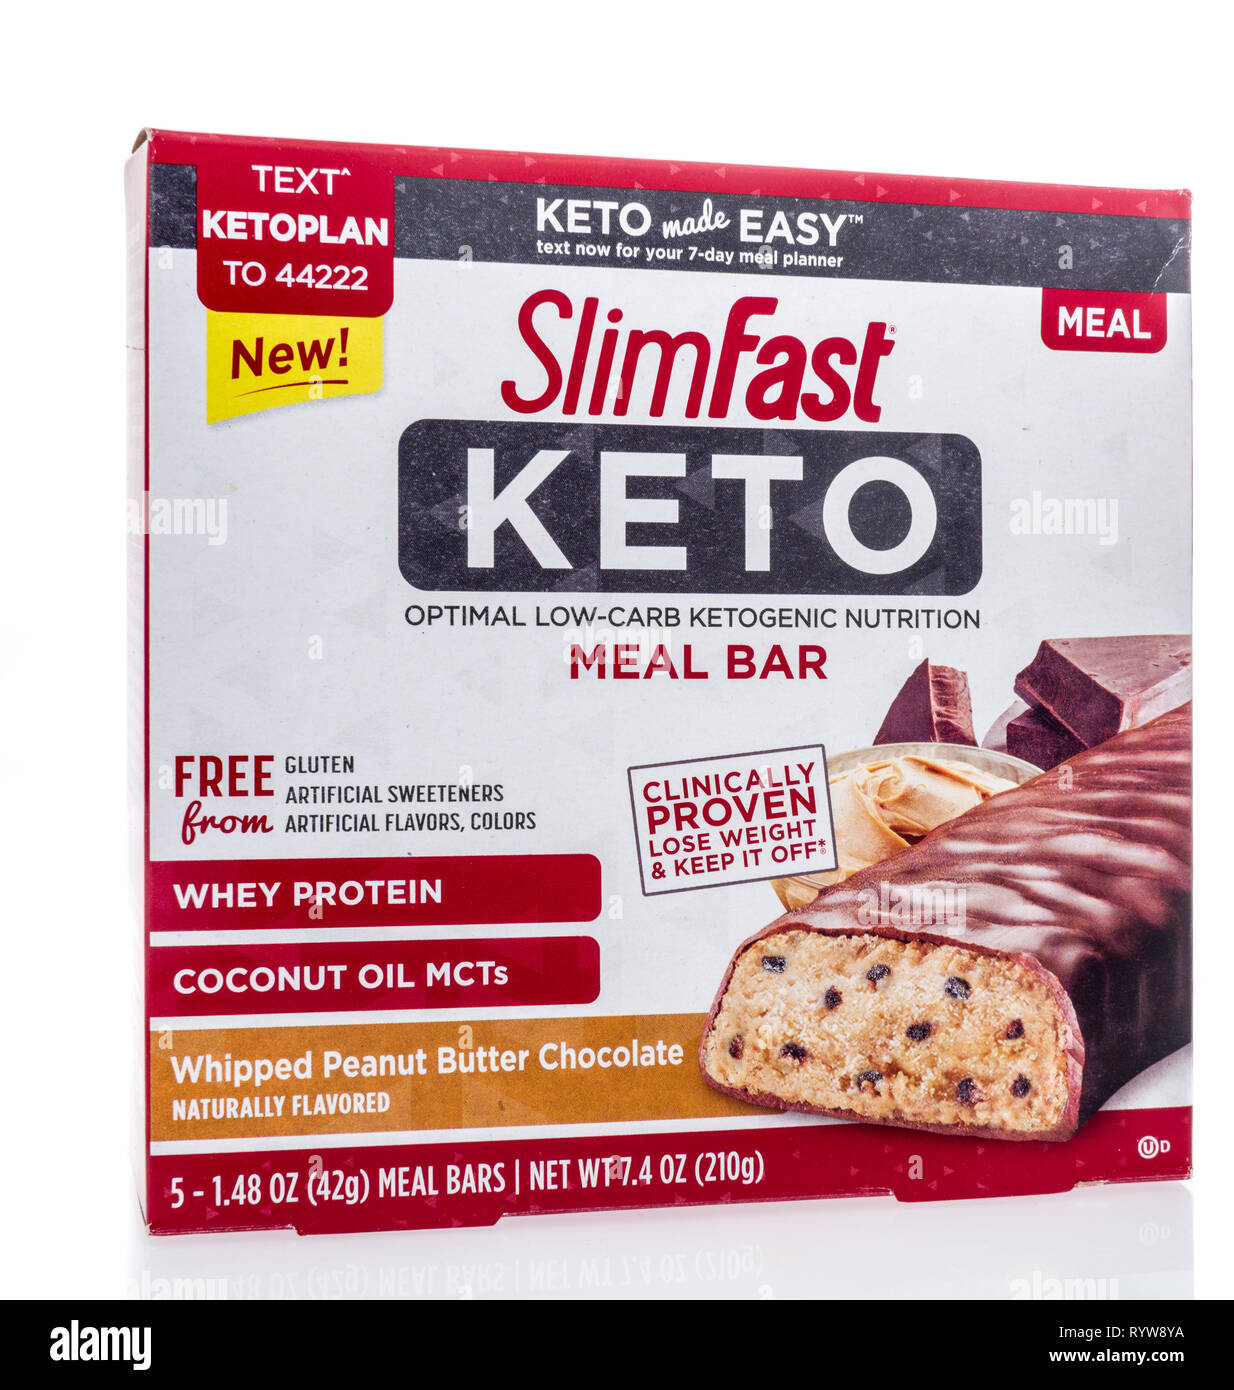 Winneconne, WI - 10 March 2019: A package Slimfast Keto optimal low-carb ketogenic nutrition meal bar on an isolated background Stock Photo